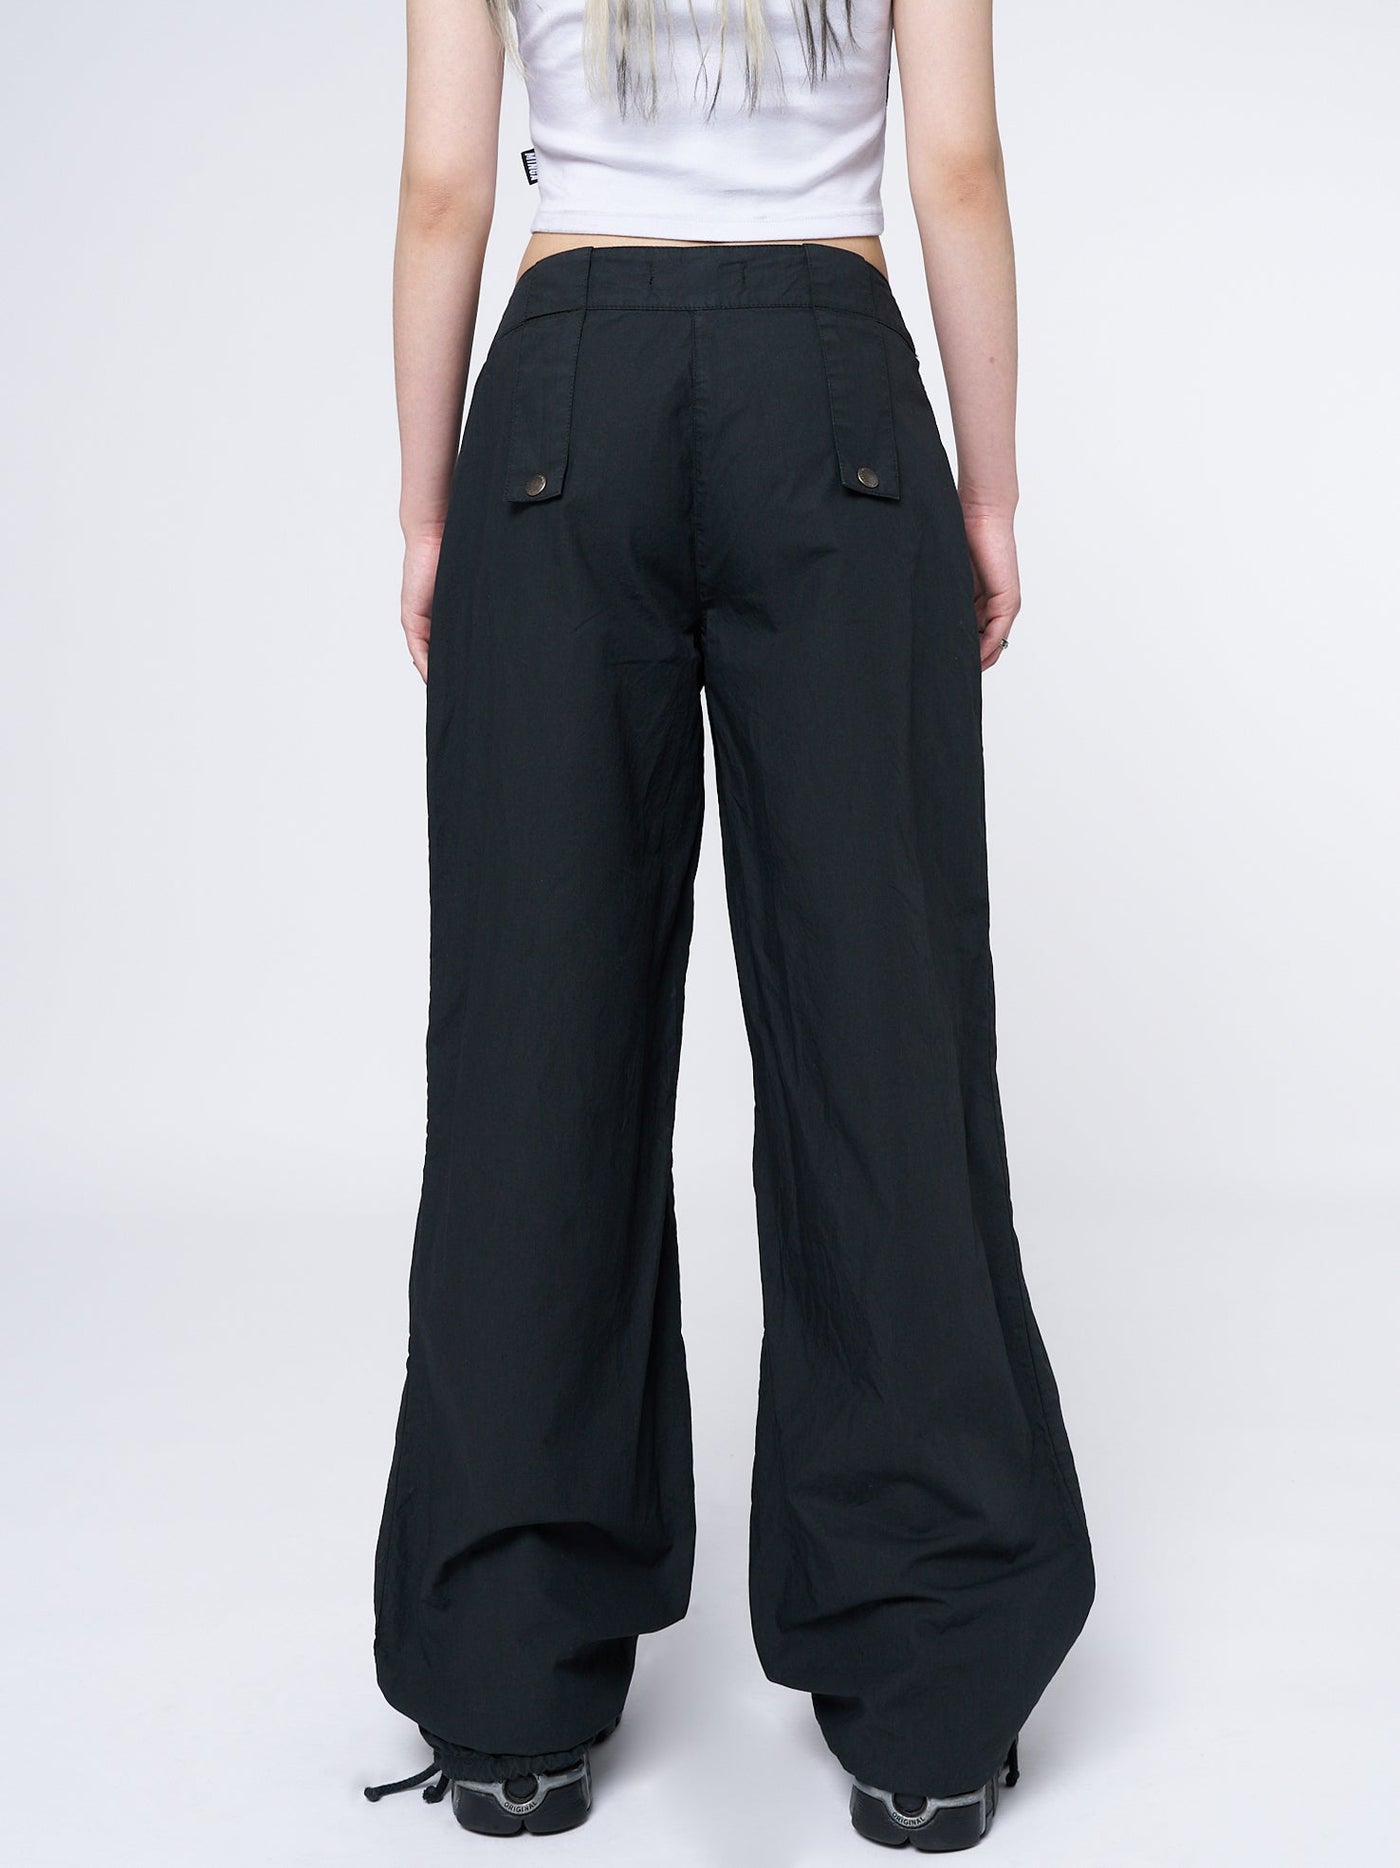 Bea Black Ruched Front Pants